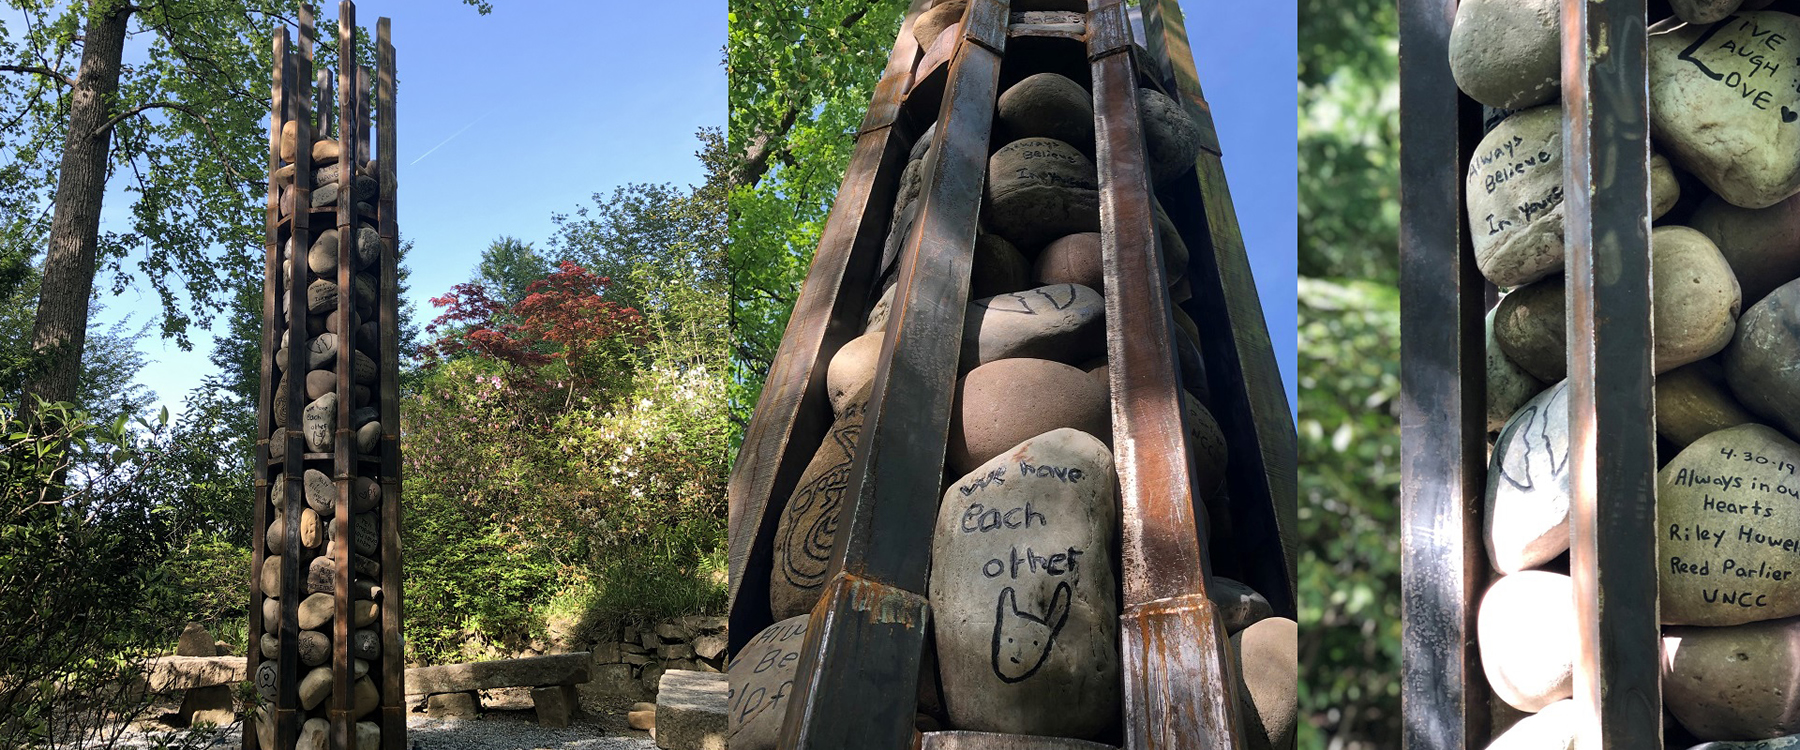 Among the tall trees of the UNC Charlotte Botanical Gardens is a new memorial dedicated as part of the University’s 2022 Niner Nation Remembrance of the April 30, 2019, campus shooting.